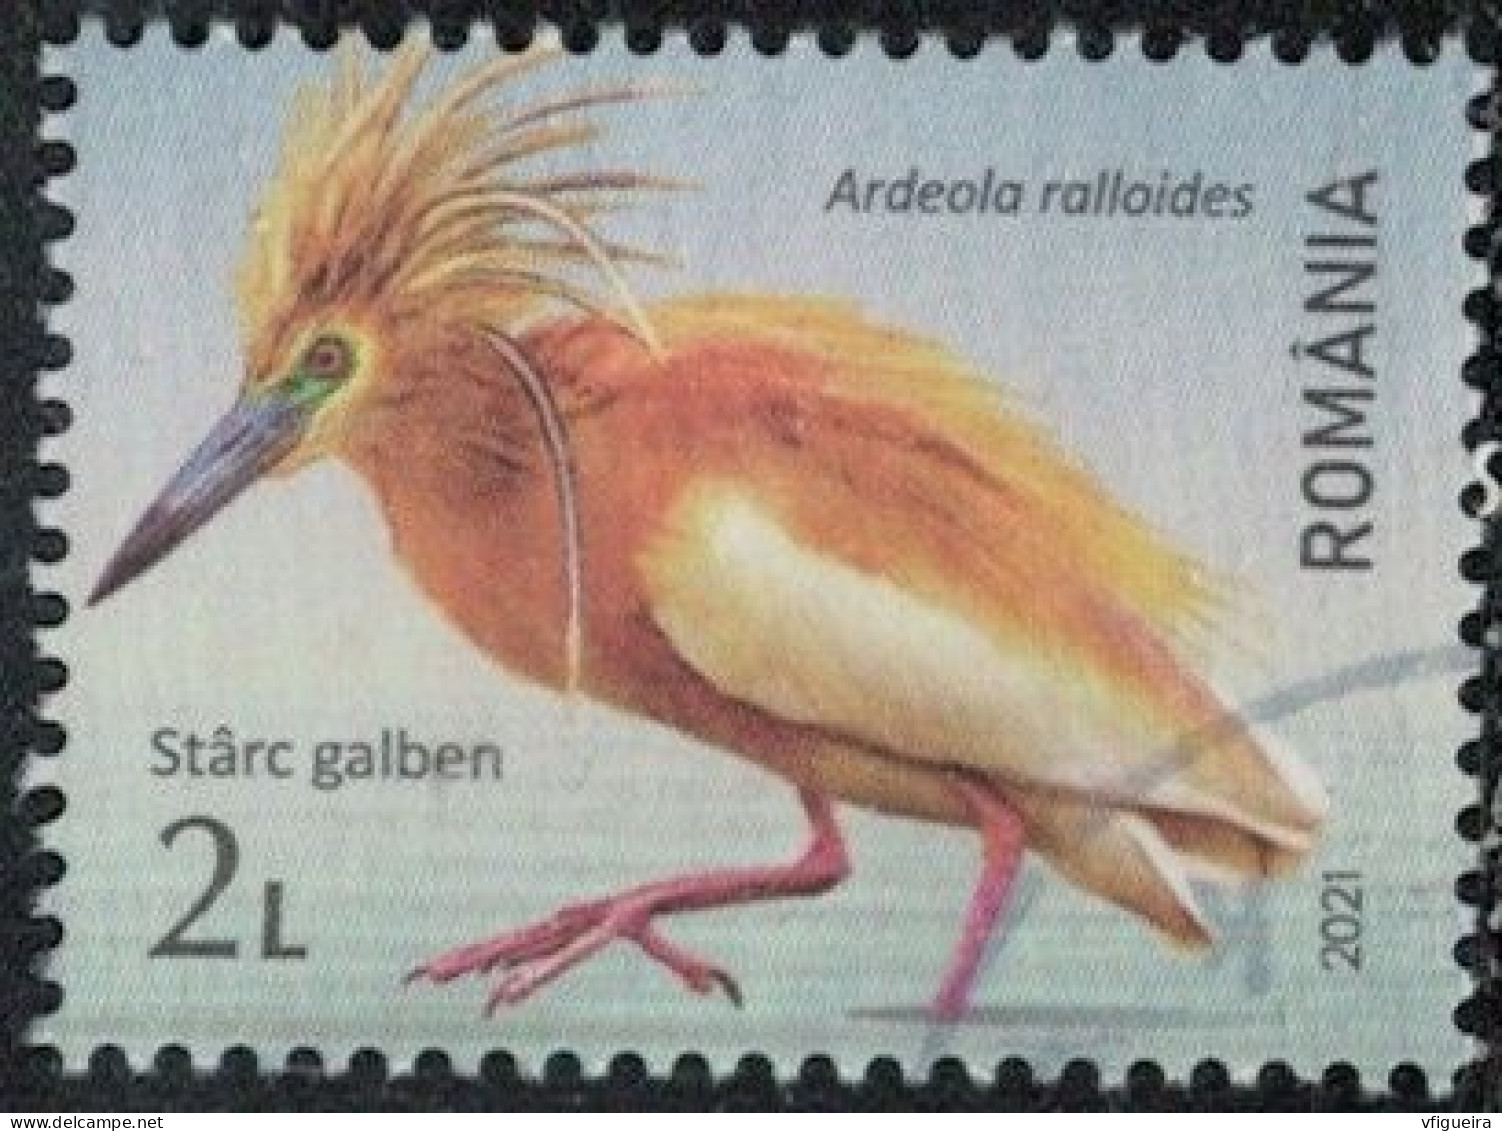 Roumanie 2021 Oblitéré Used Oiseau Ardeola Ralloides Crabier Chevelu Y&T RO 6674 SU - Used Stamps